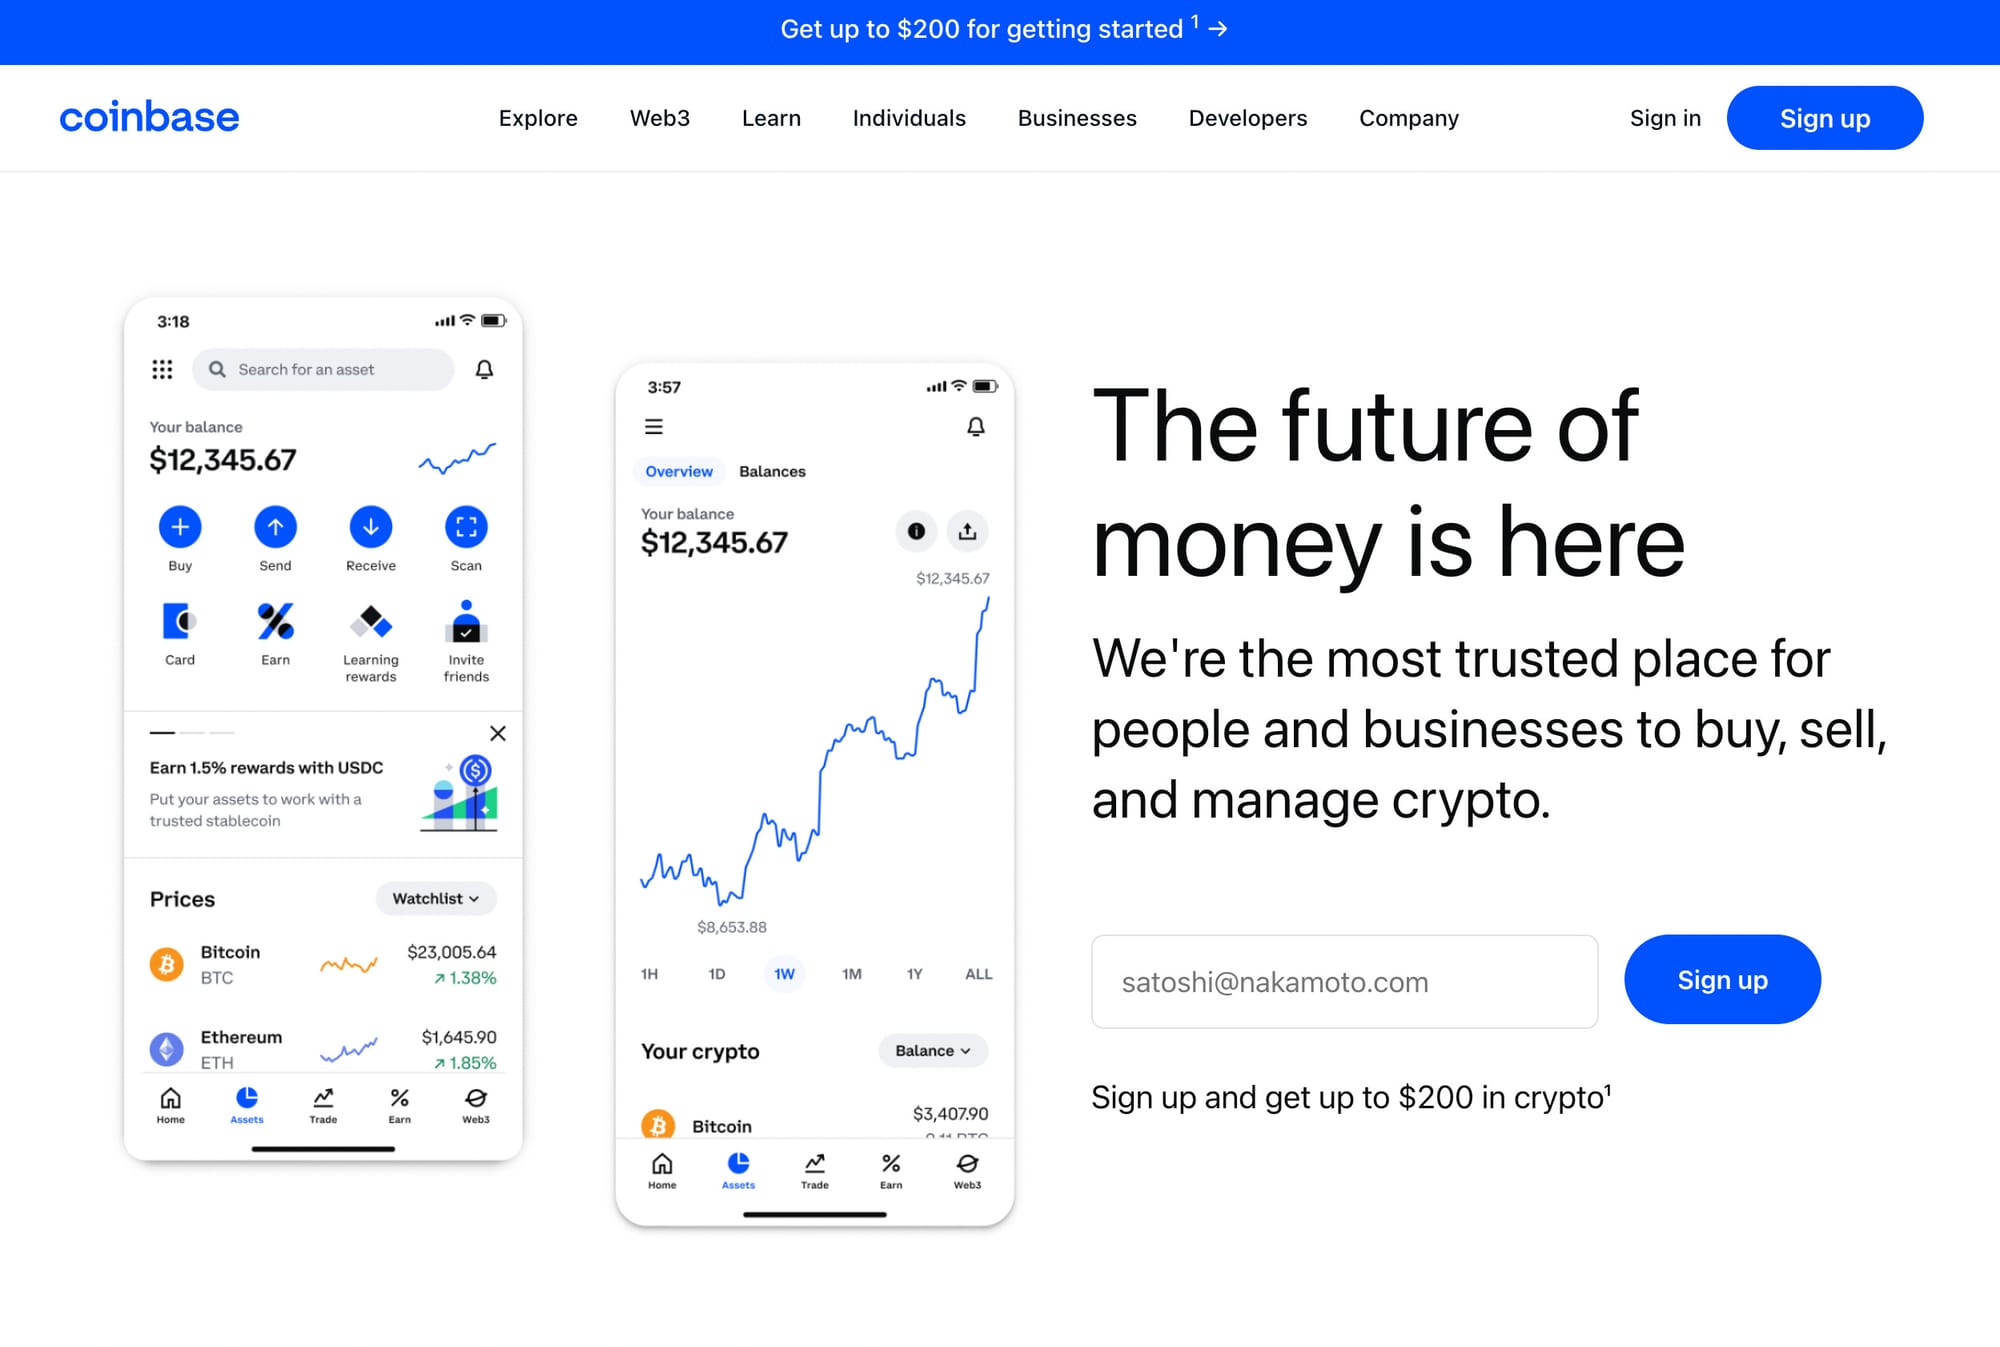 Screenshot of the Coinbase homepage, which says in large text: "The future of money is here"